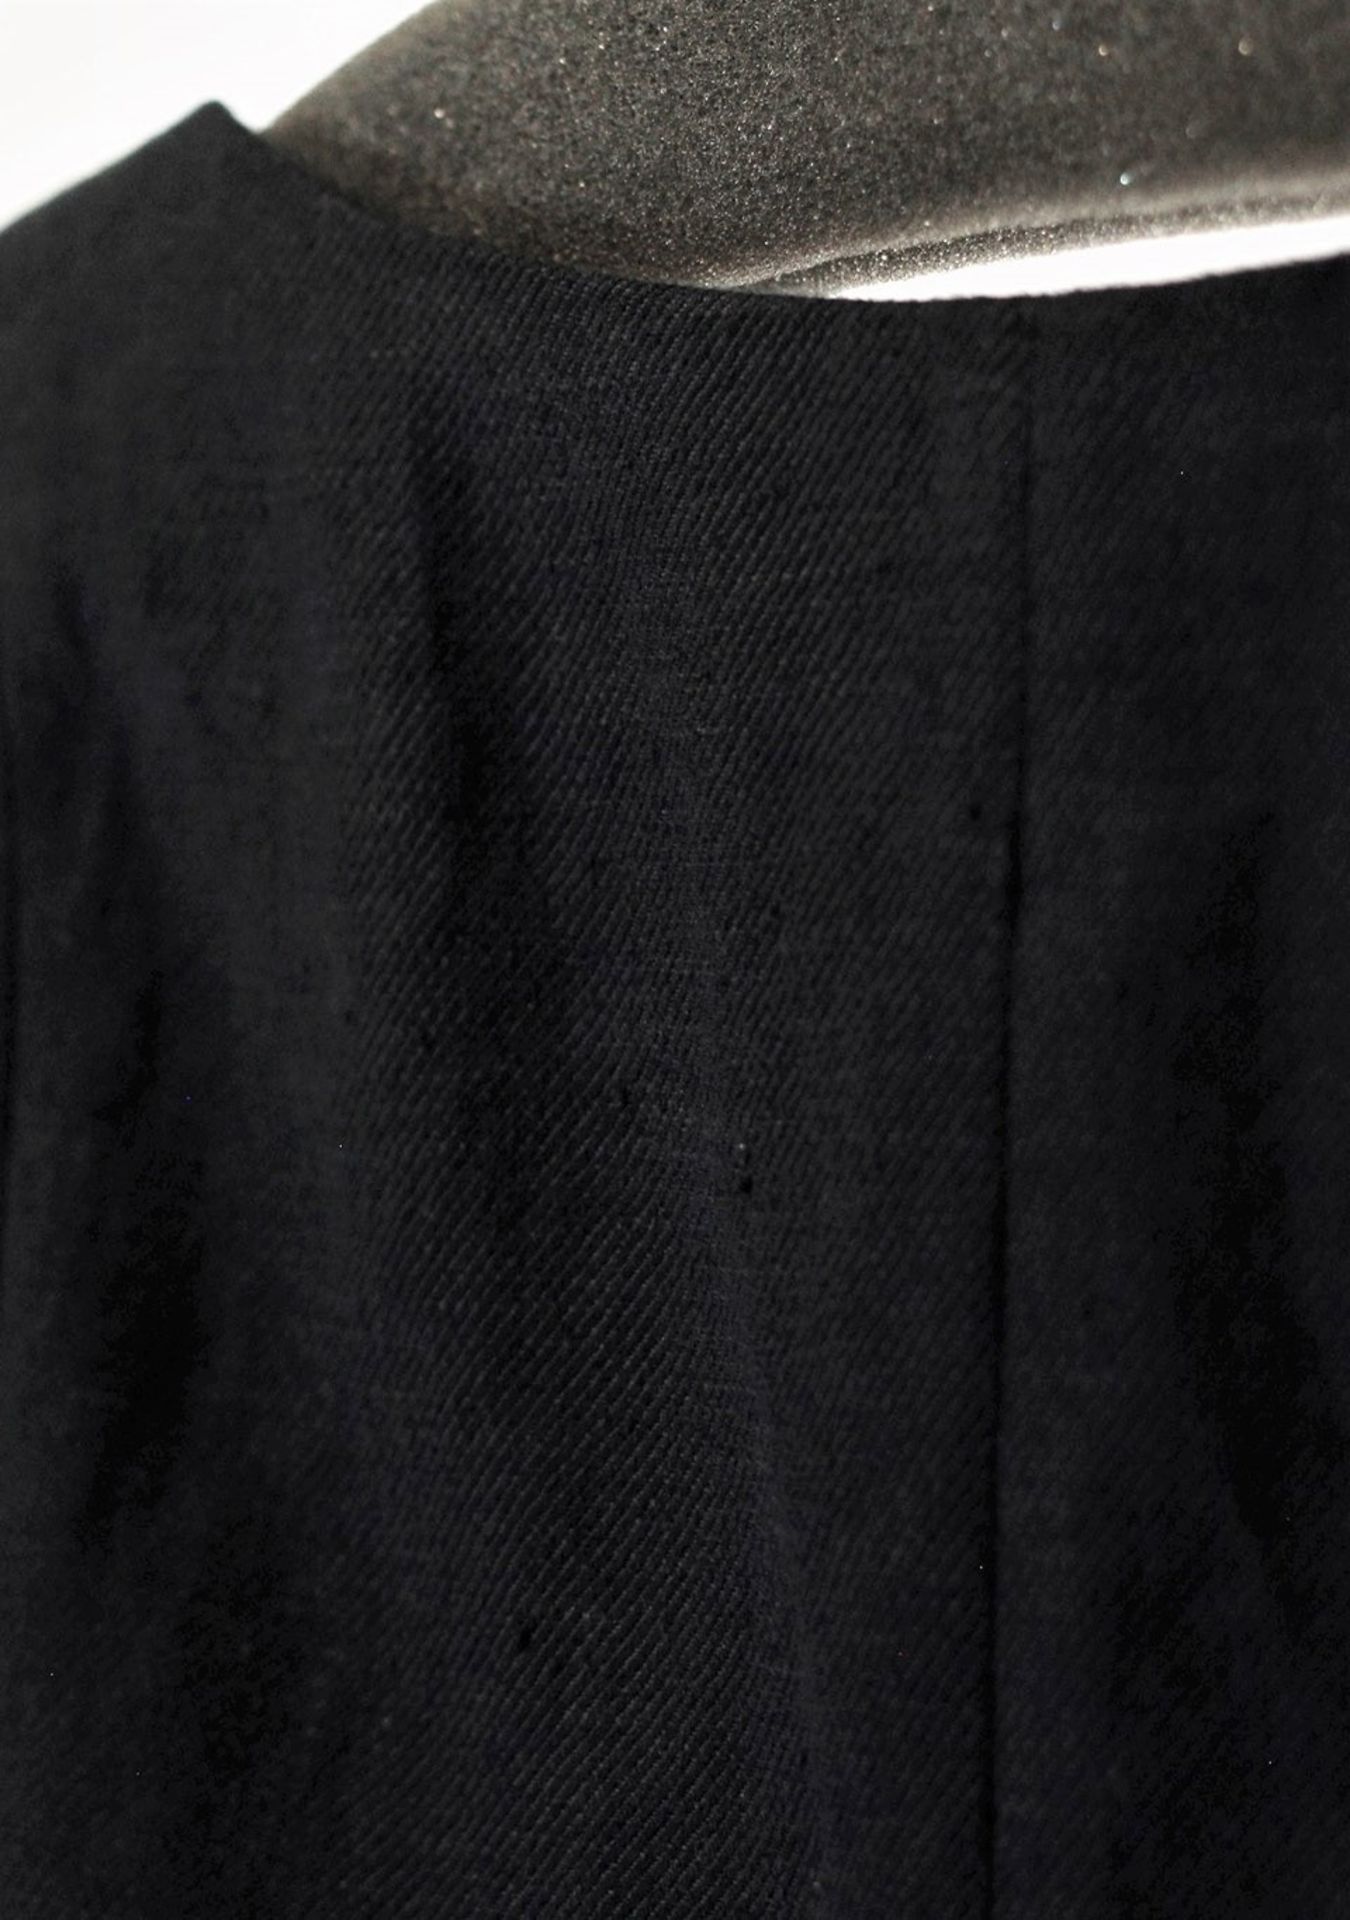 1 x Natan Black Bolero - Size: 10 - Material: 100% Linen - From a High End Clothing Boutique In - Image 7 of 10